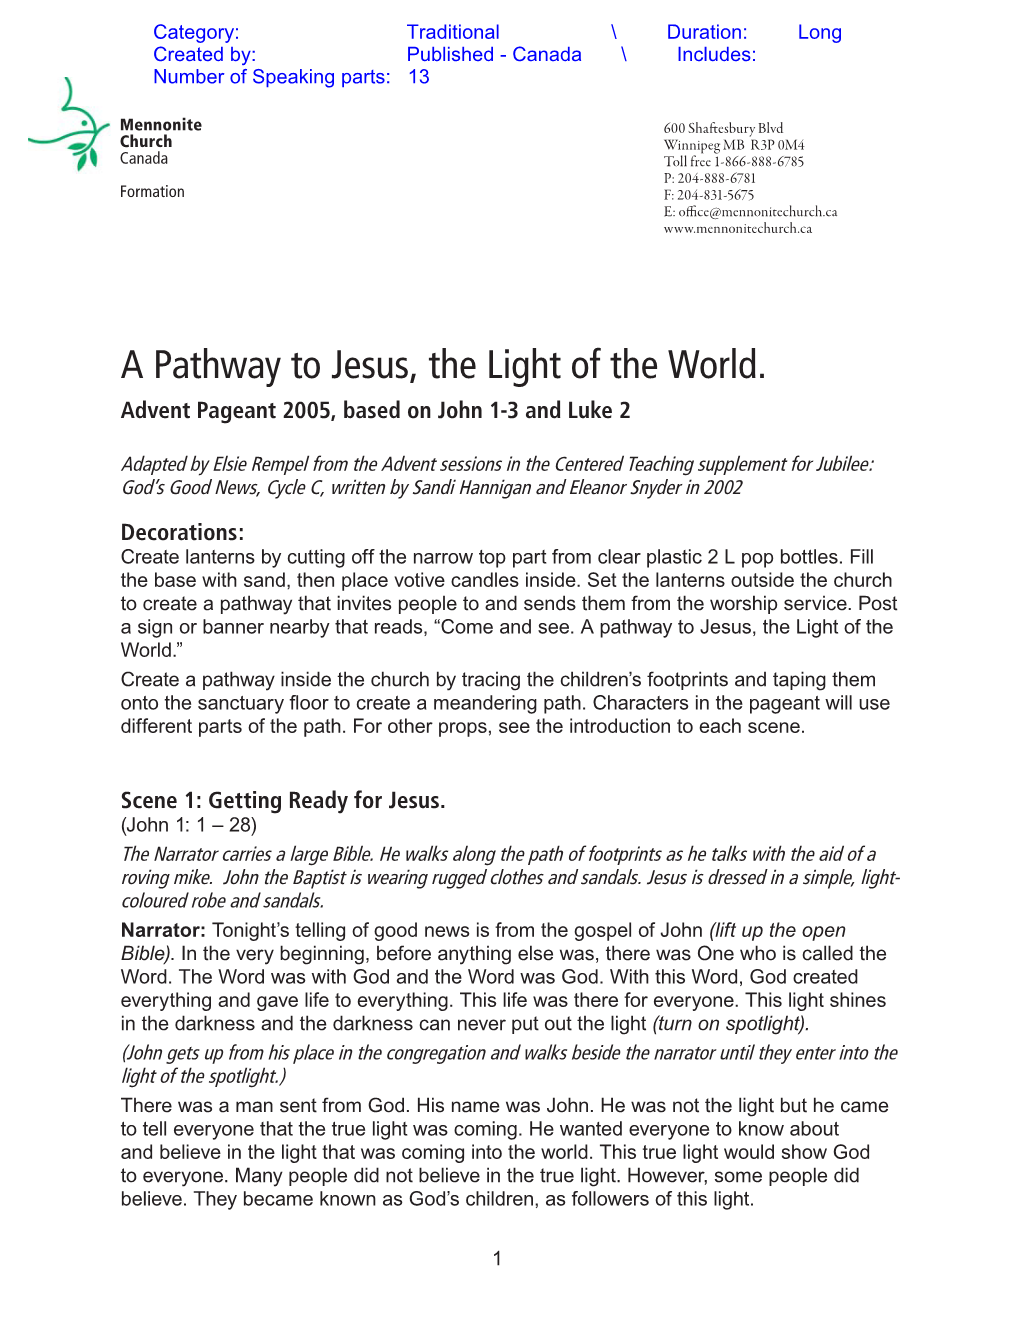 A Pathway to Jesus the Light of the World.Indd